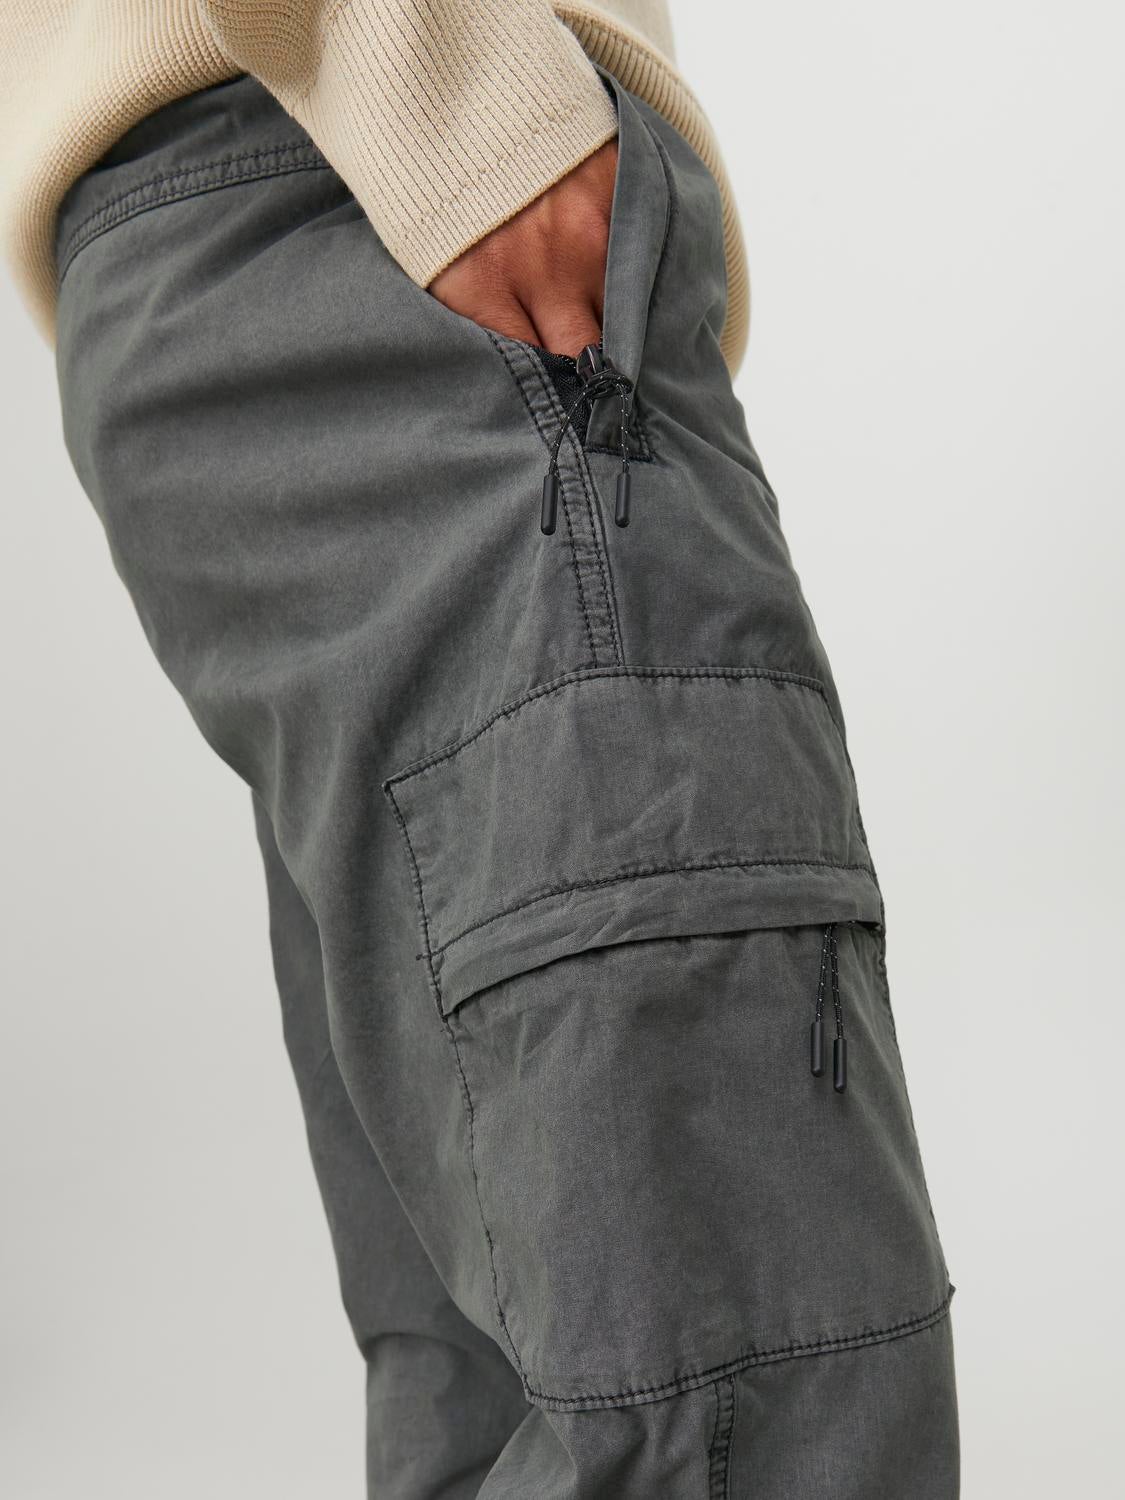 military style mens cargo pants in gray